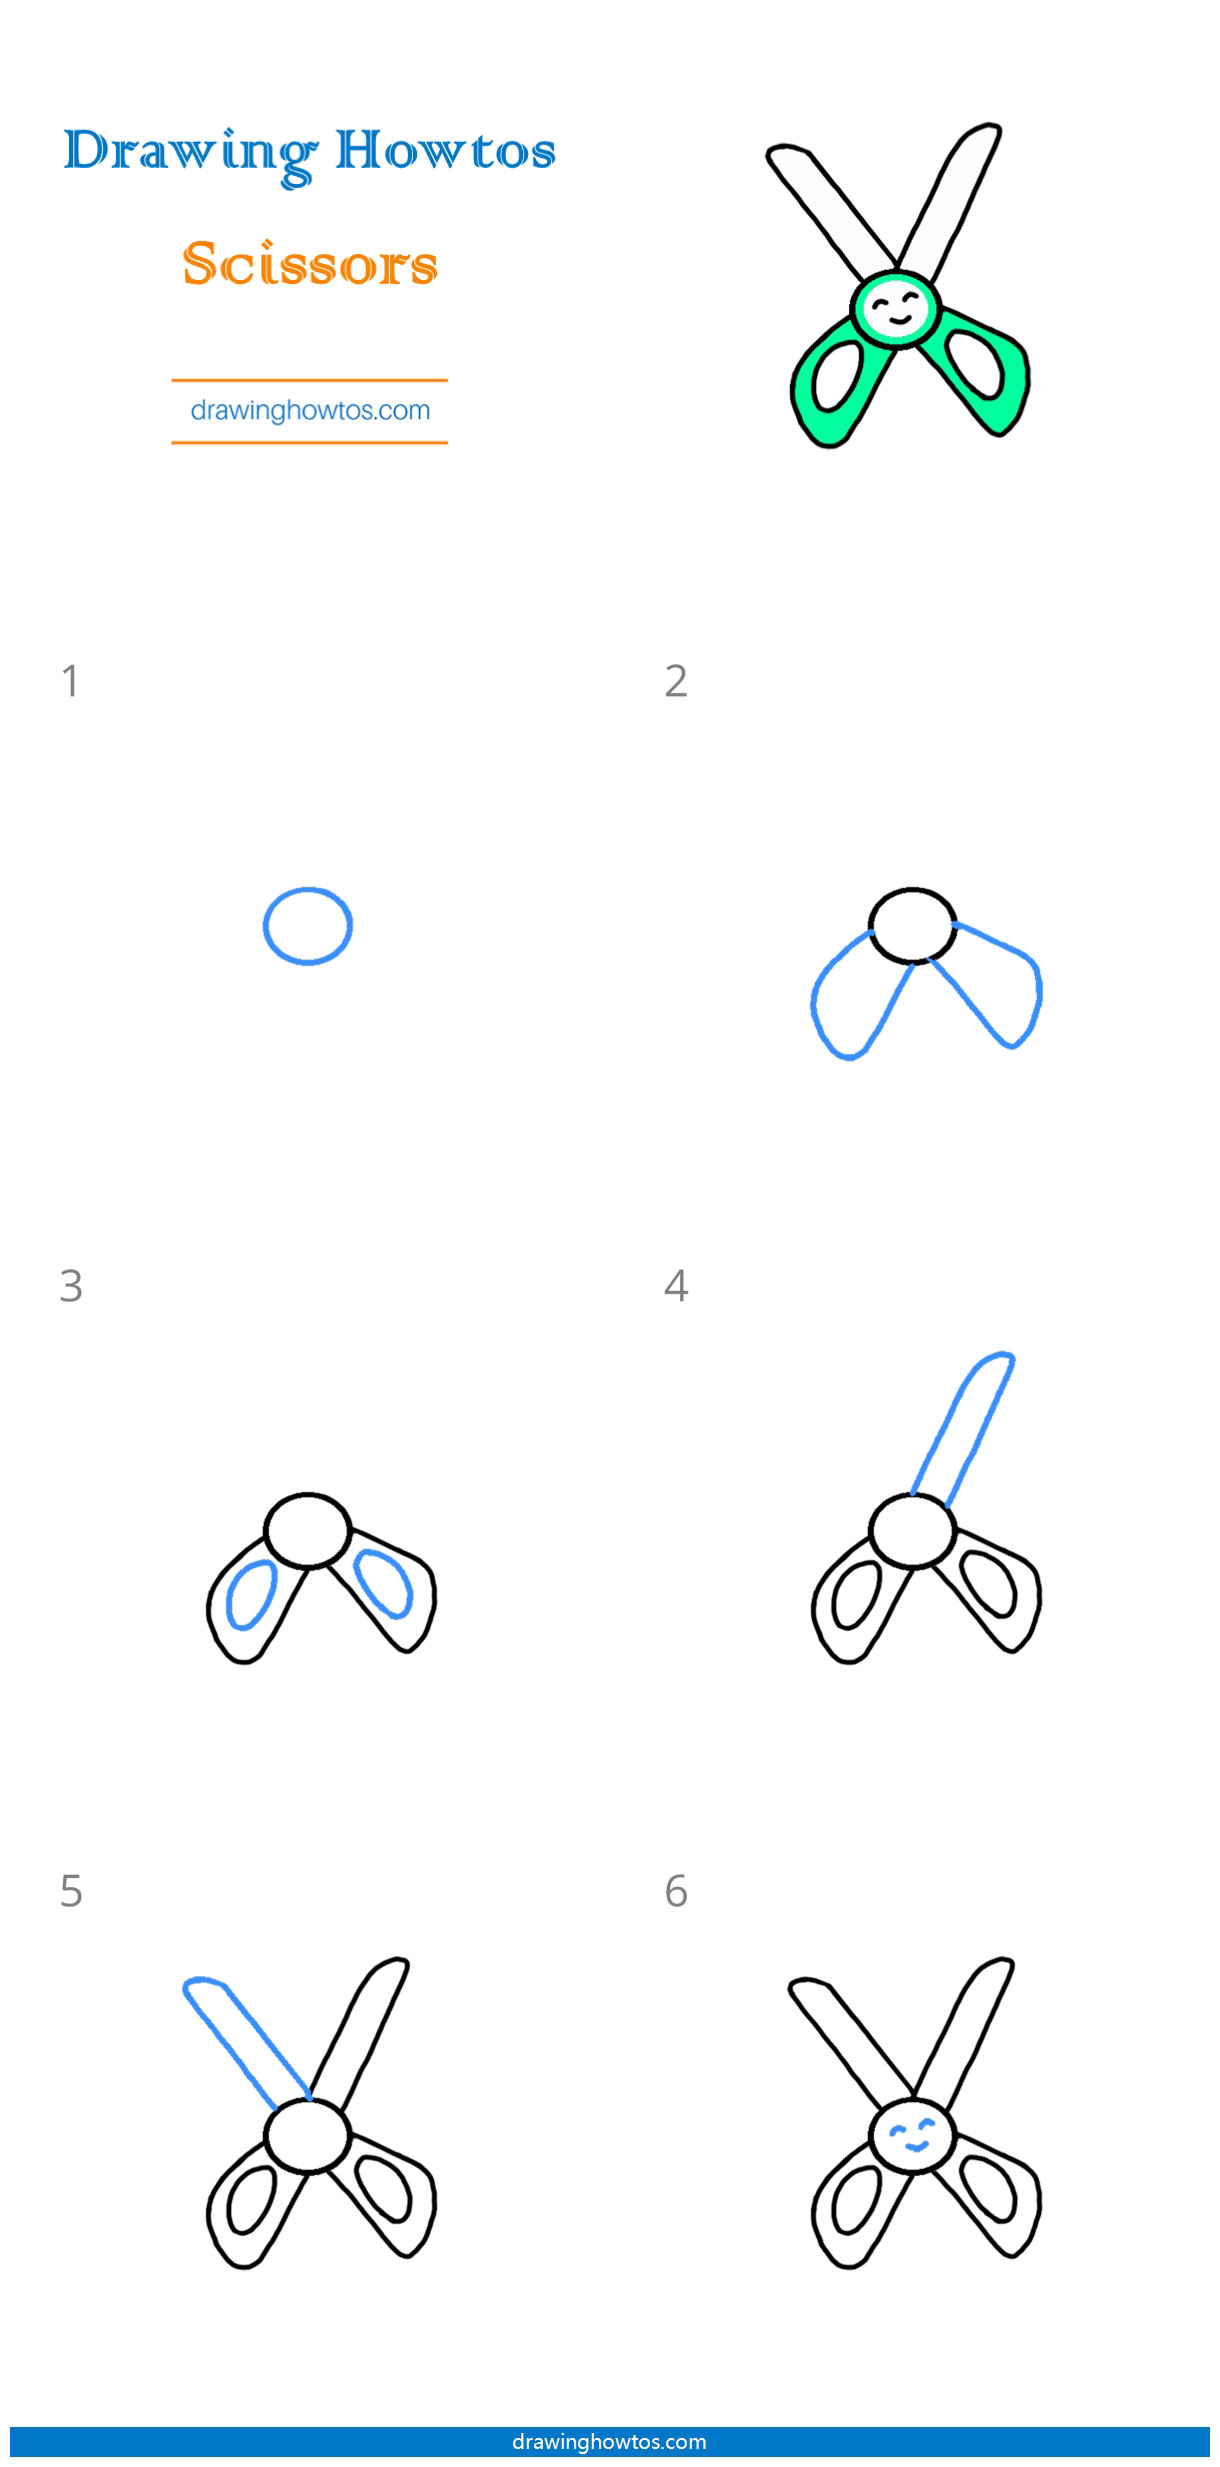 How to Draw Scissors Step by Step